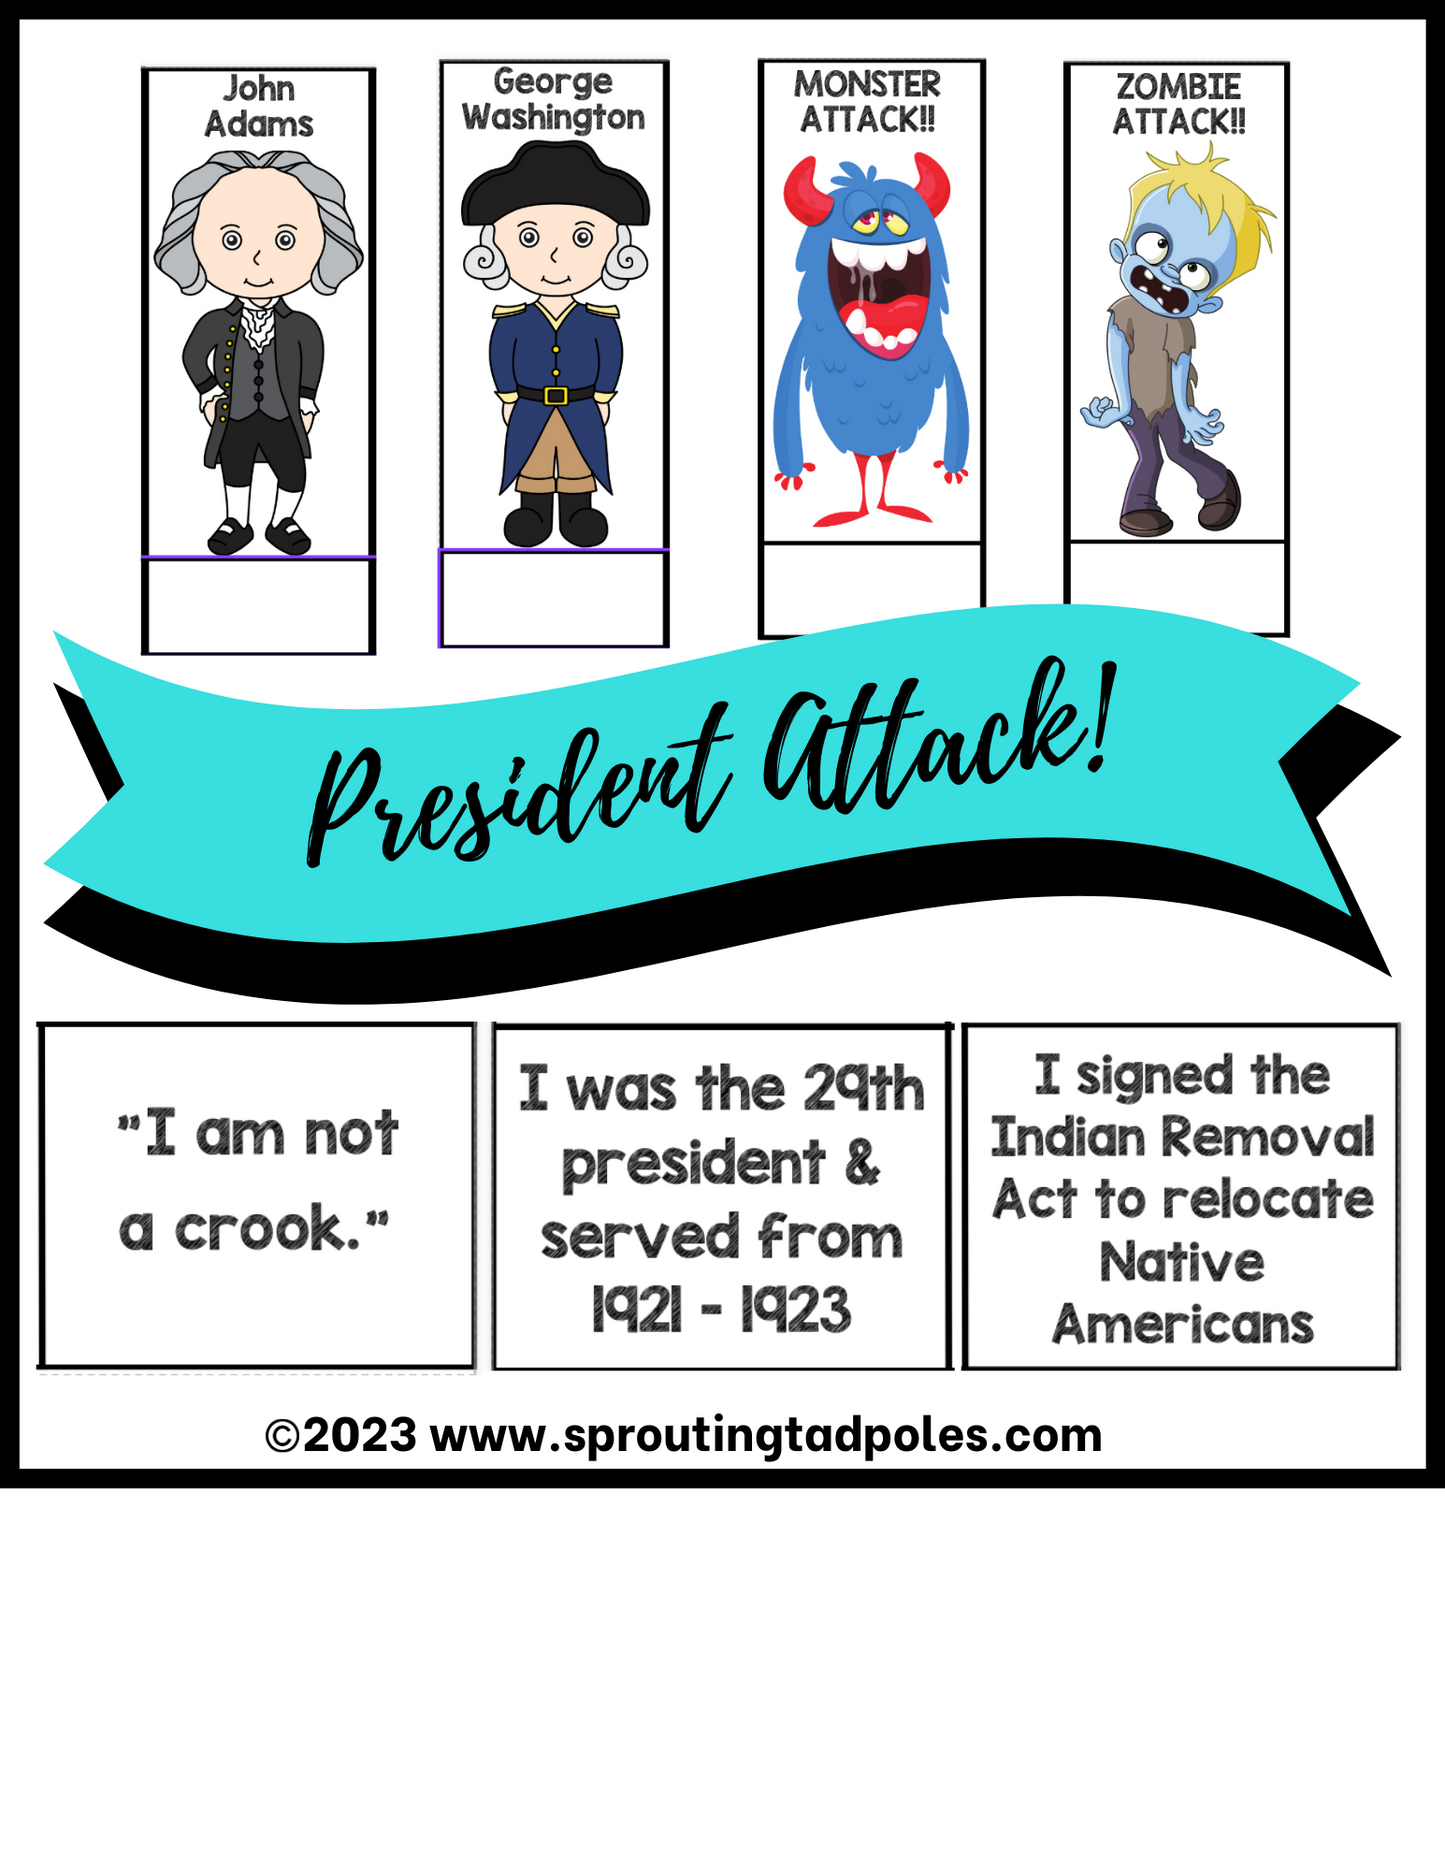 Presidents Attack! Game: Zombie or Monster